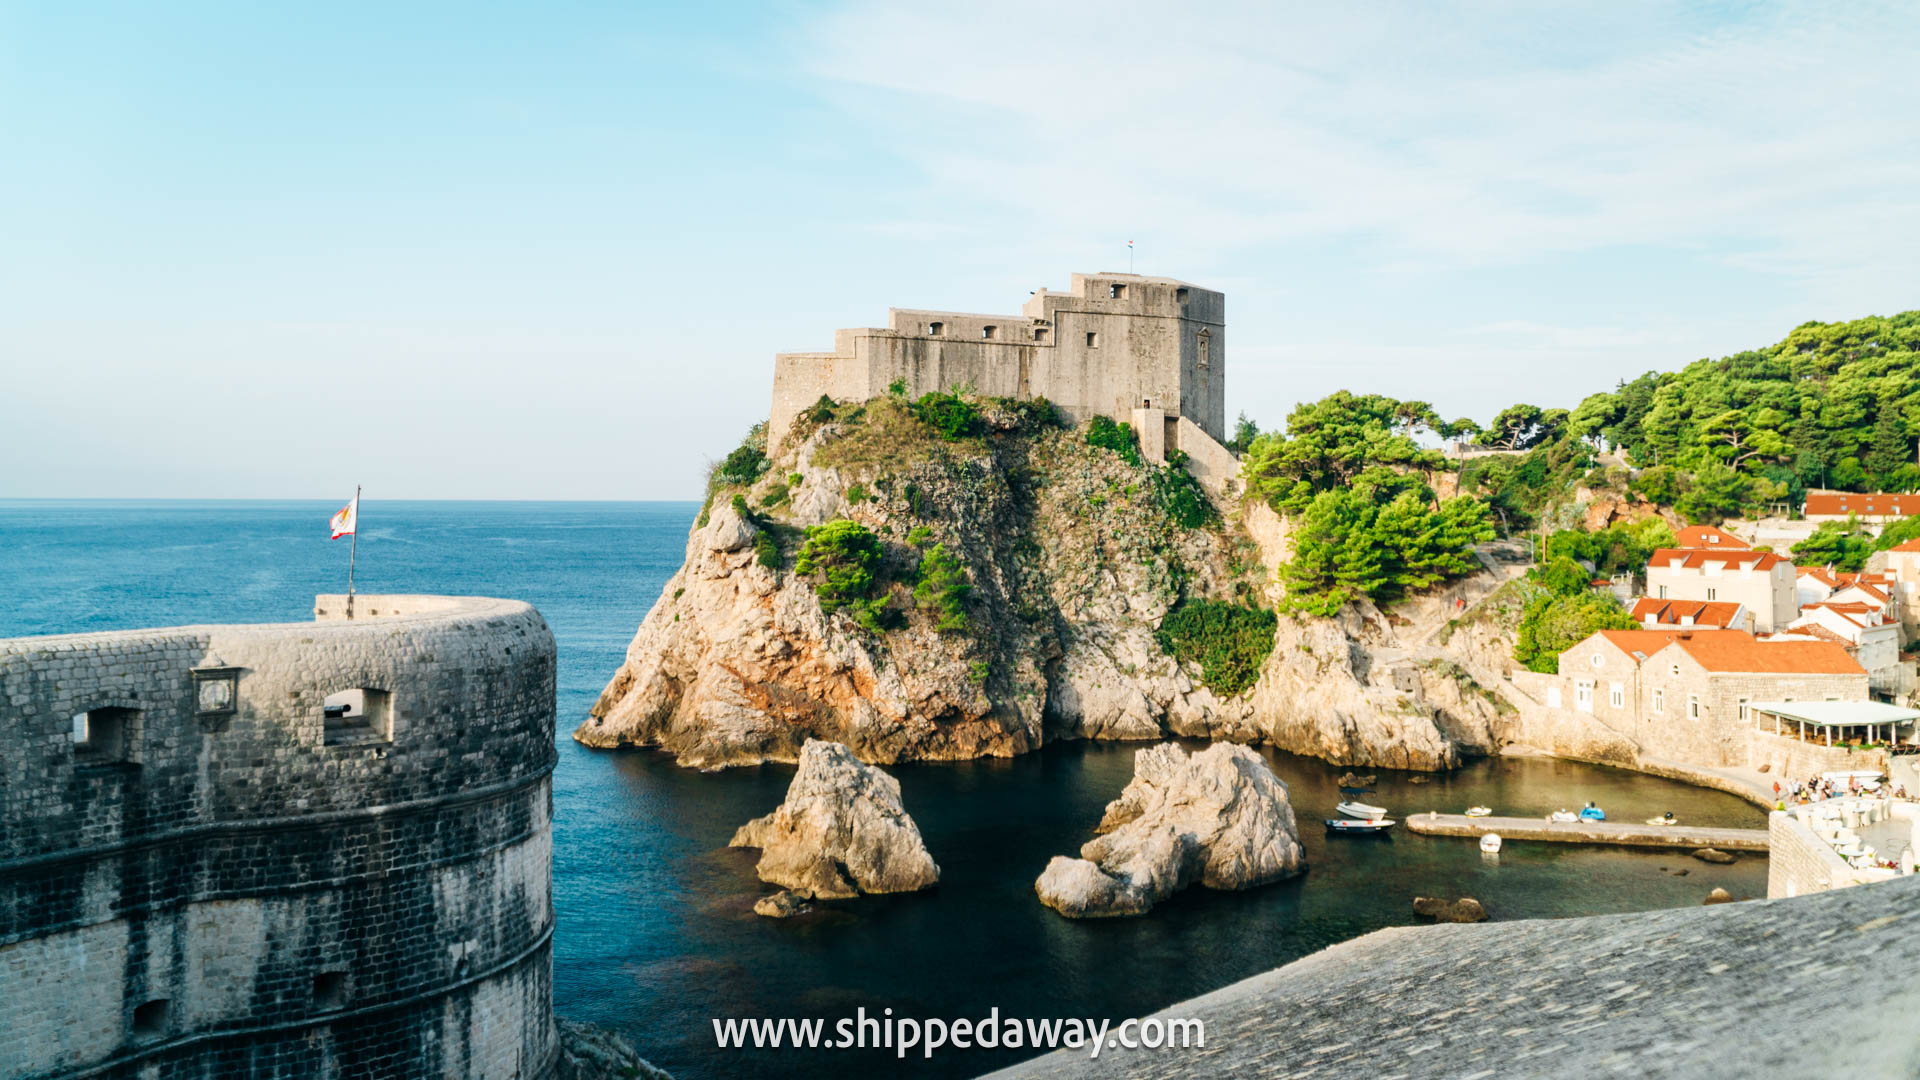 west harbor dubrovnik, top things to do in dubrovnik, dubrovnik croatia, dubrovnik attractions, dubrovnik old town, dubrovnik travel guide, dubrovnik travel tips, game of thrones dubrovnik